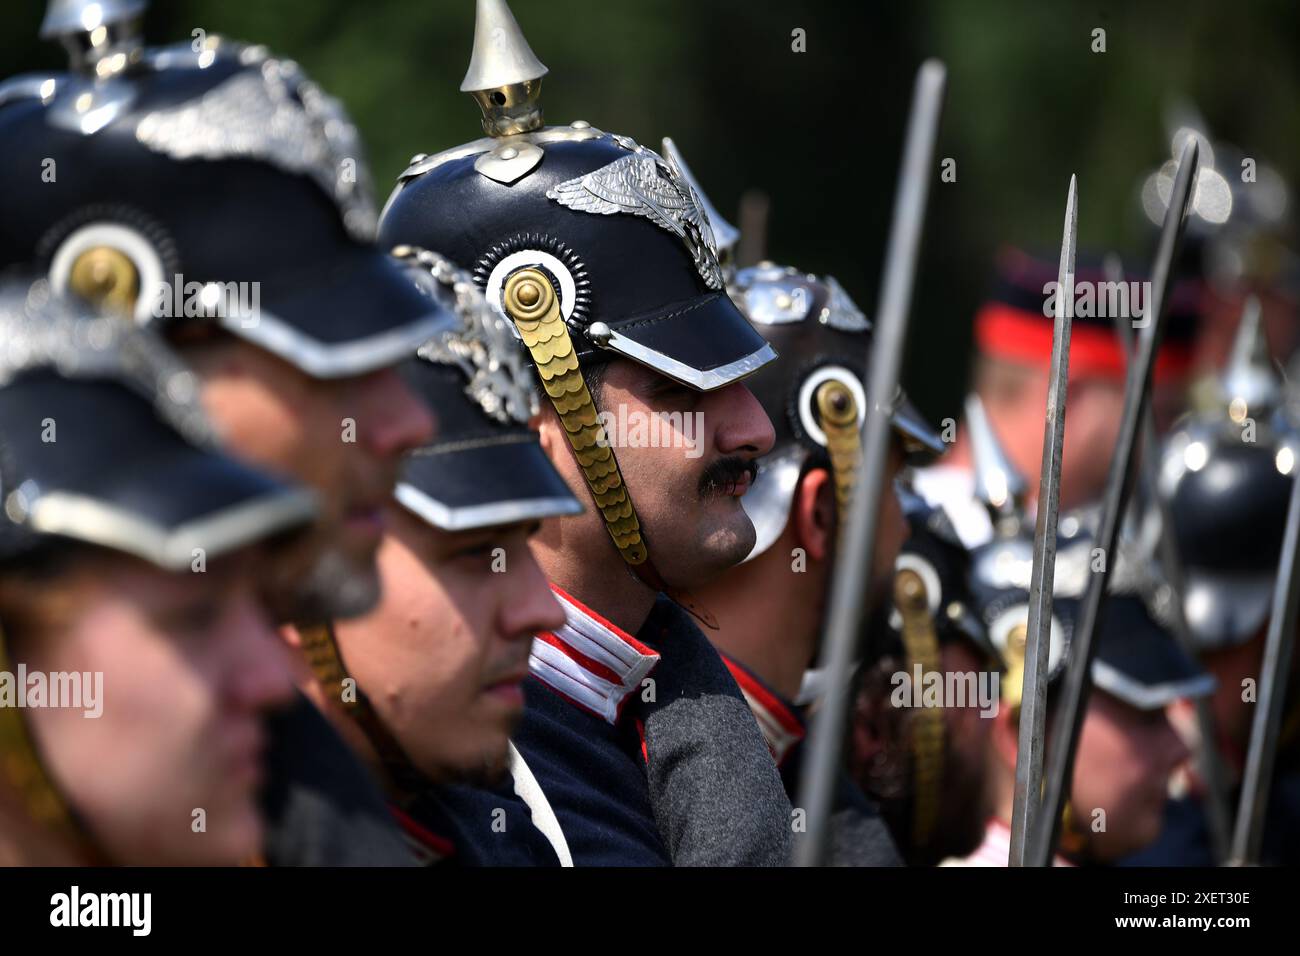 Chlum, Czech Republic. 29th June, 2024. People dressed as soldiers of the Austrian and Prussian army on the top of the hill Chlum near Hradec Kralove city paid tribute to the fallen soldiers by Battle scene ''The 18th Infantry Regiment from Hradec Kralove in the Battle of Chlum 1866'' in the Chlum in the Czech Republic.The Austrian army of 215,000 faced the Prussian Army of the Elbe (39,000) and First Army (85,000) on 3 July. The battle ended with heavy casualties for both sides. The Prussians had nearly 9,000 men killed, wounded, or missing. Credit: ZUMA Press, Inc./Alamy Live News Stock Photo